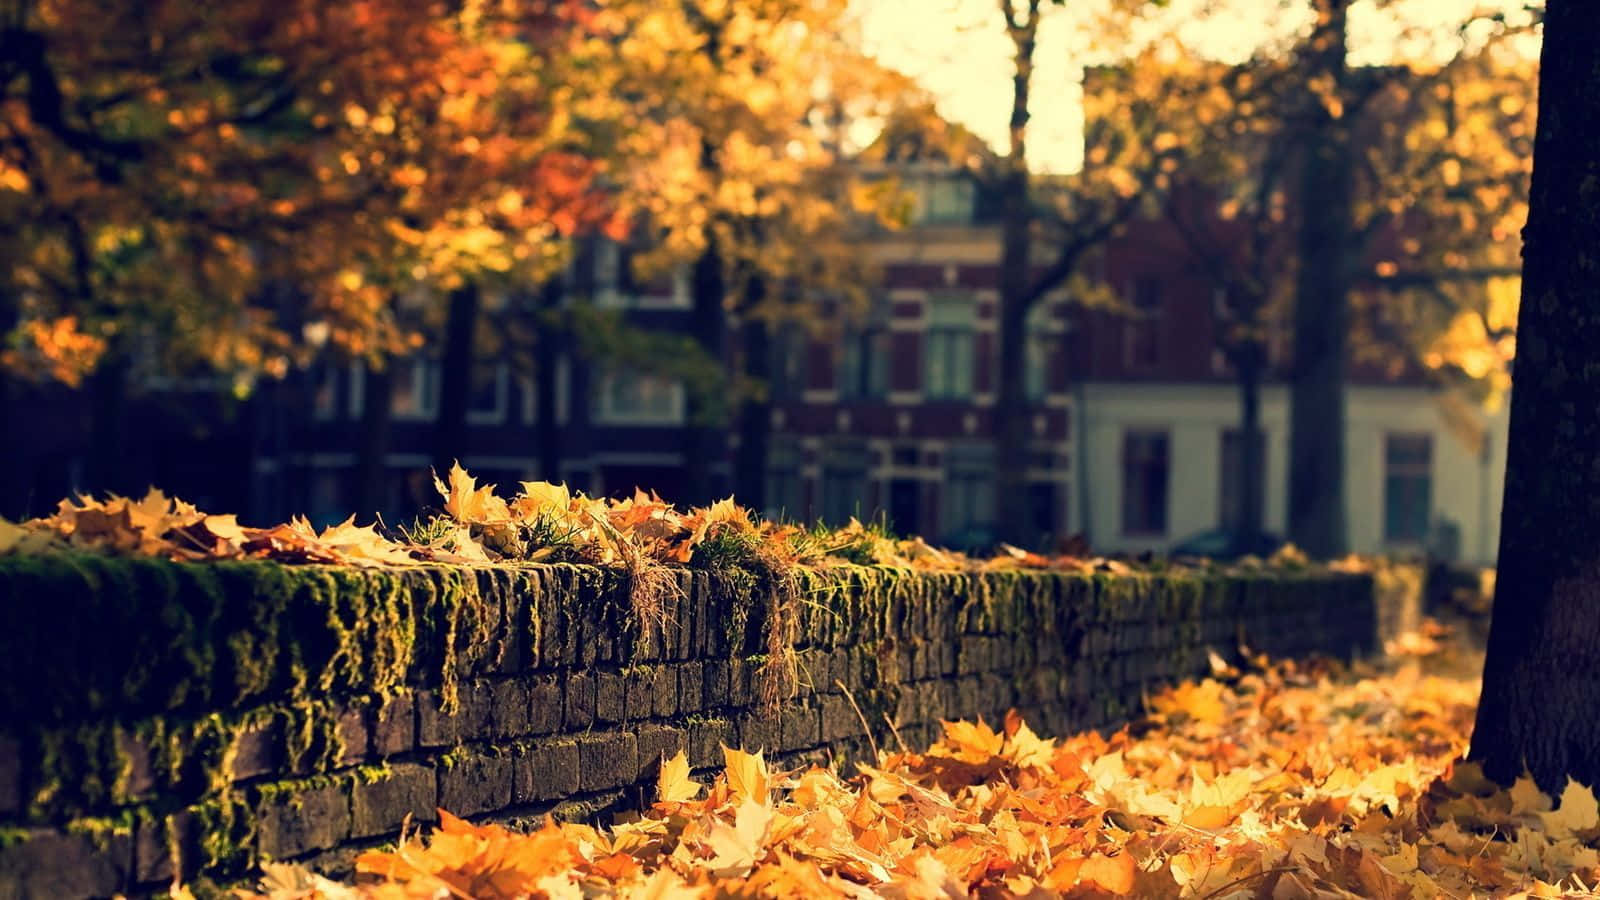 Autumn Leaves On A Brick Wall Background